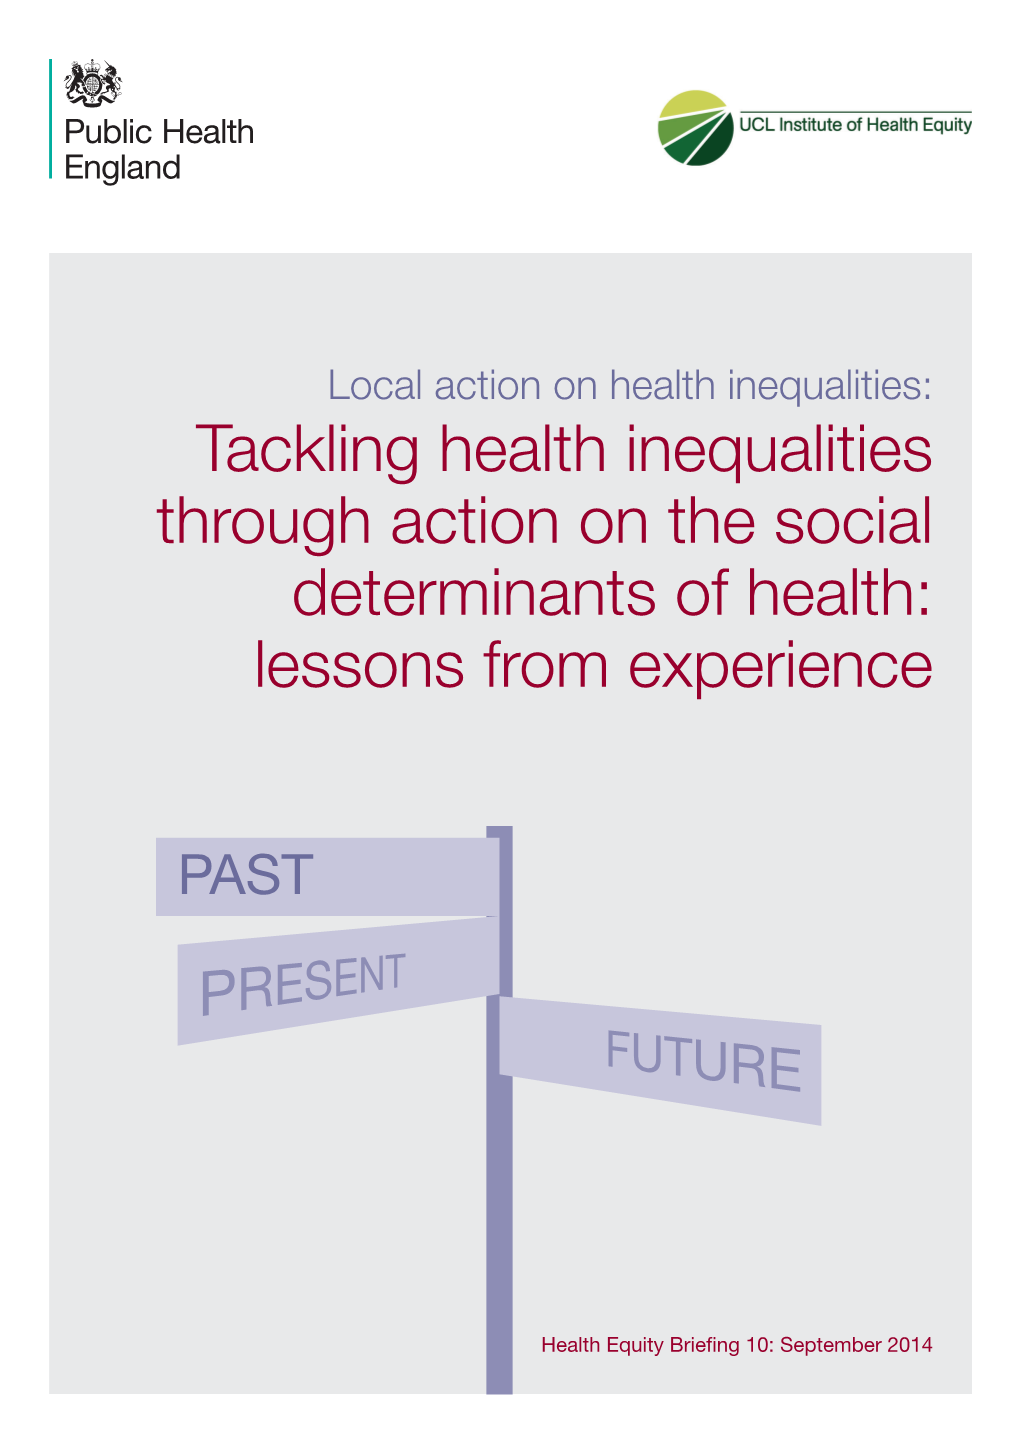 Tackling Health Inequalities Through Action on the Social Determinants of Health: Lessons from Experience